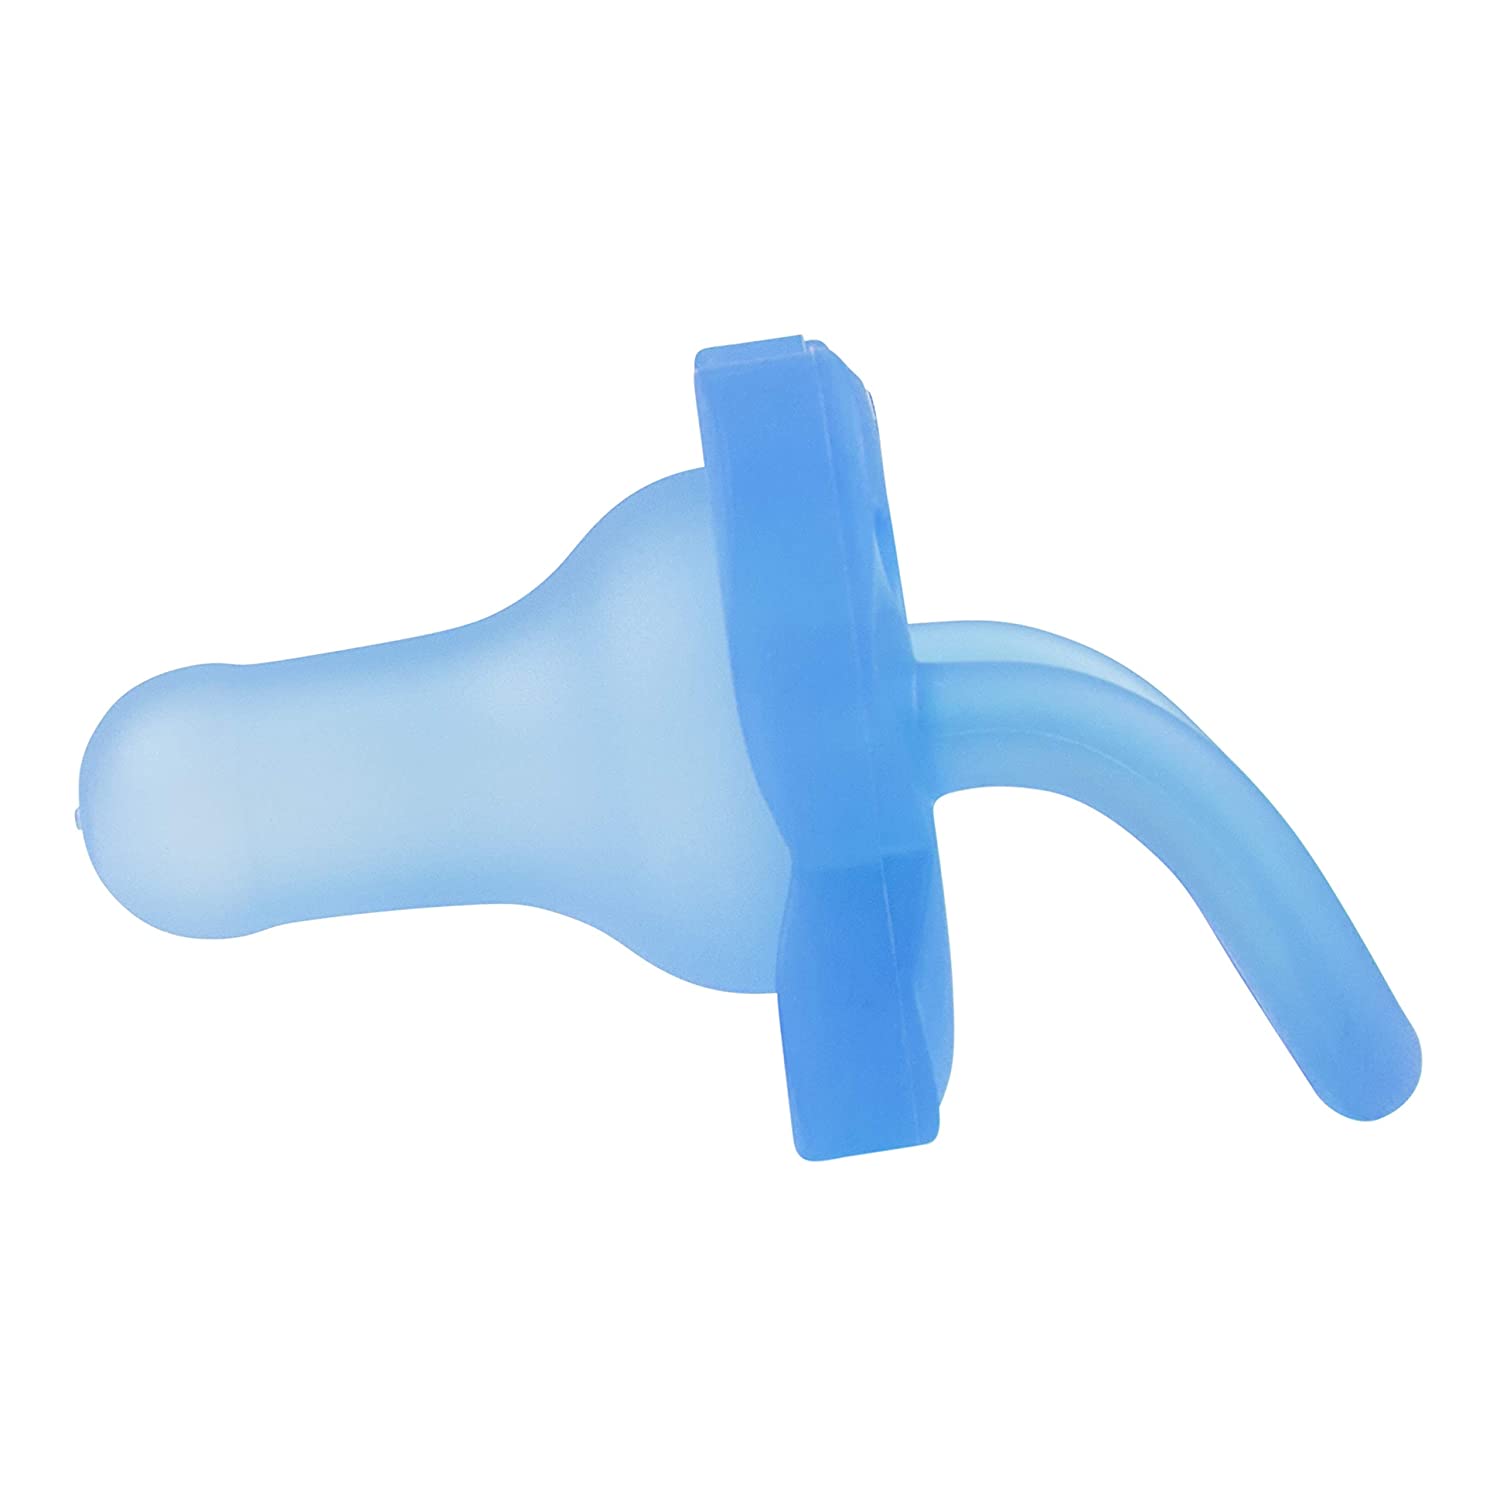 Dr. Browns Happy Pacifier Silicone One-Piece Soother - Blue - DBPS11008-INTL